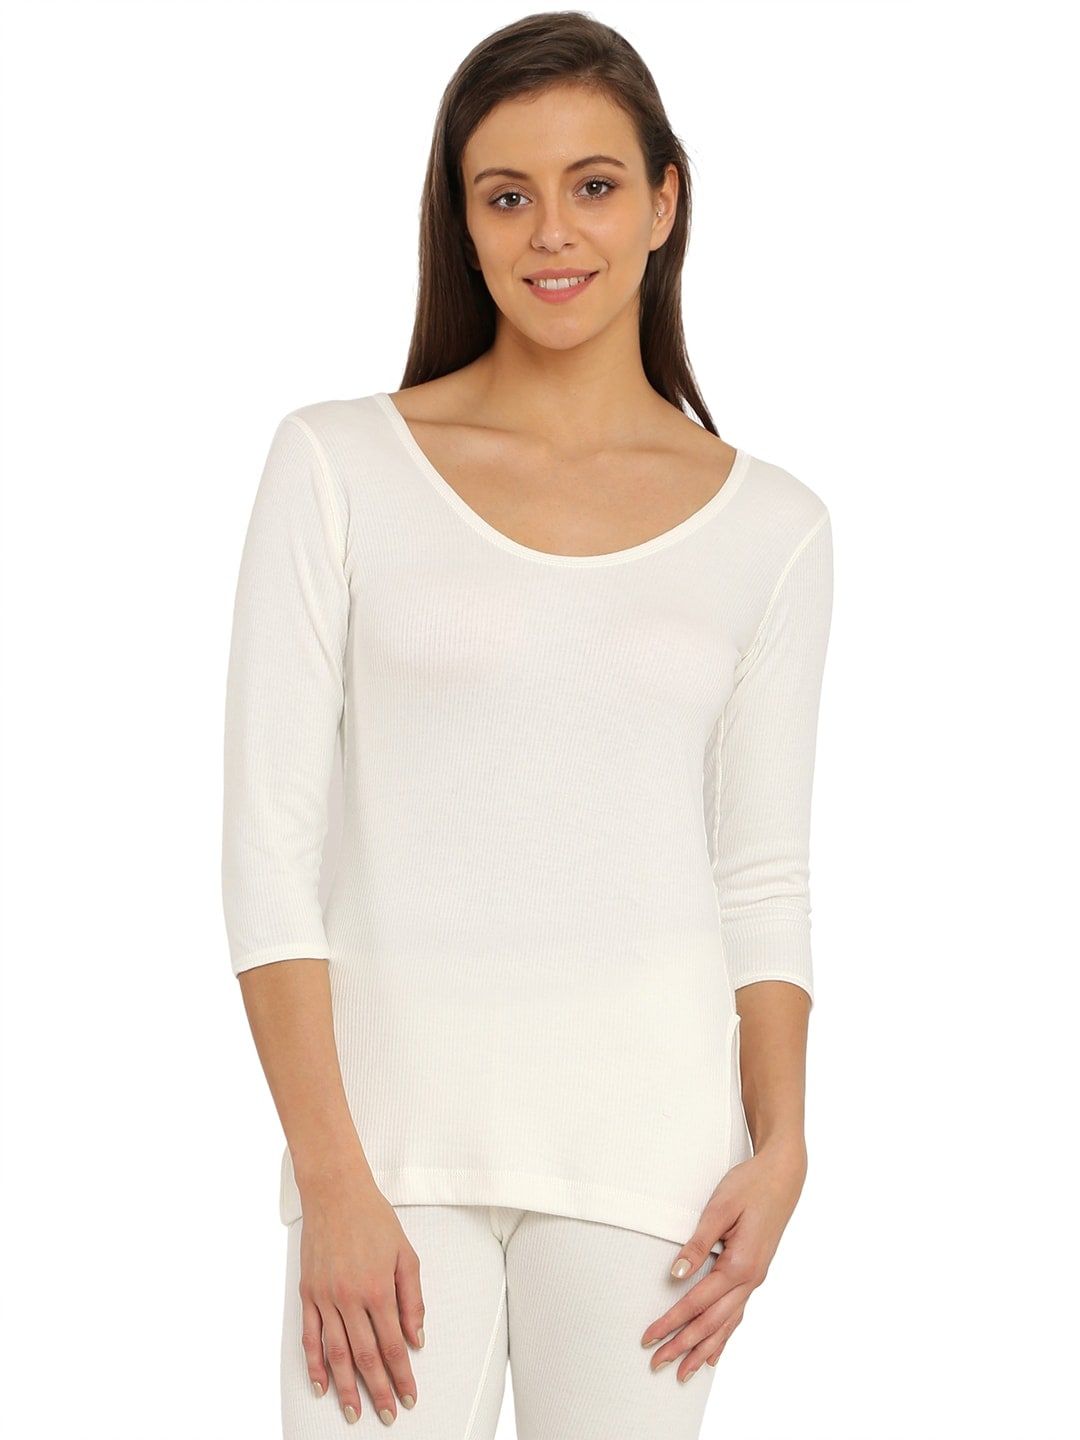 Jockey Women Off White Solid Thremal Top 2503-0105 Price in India